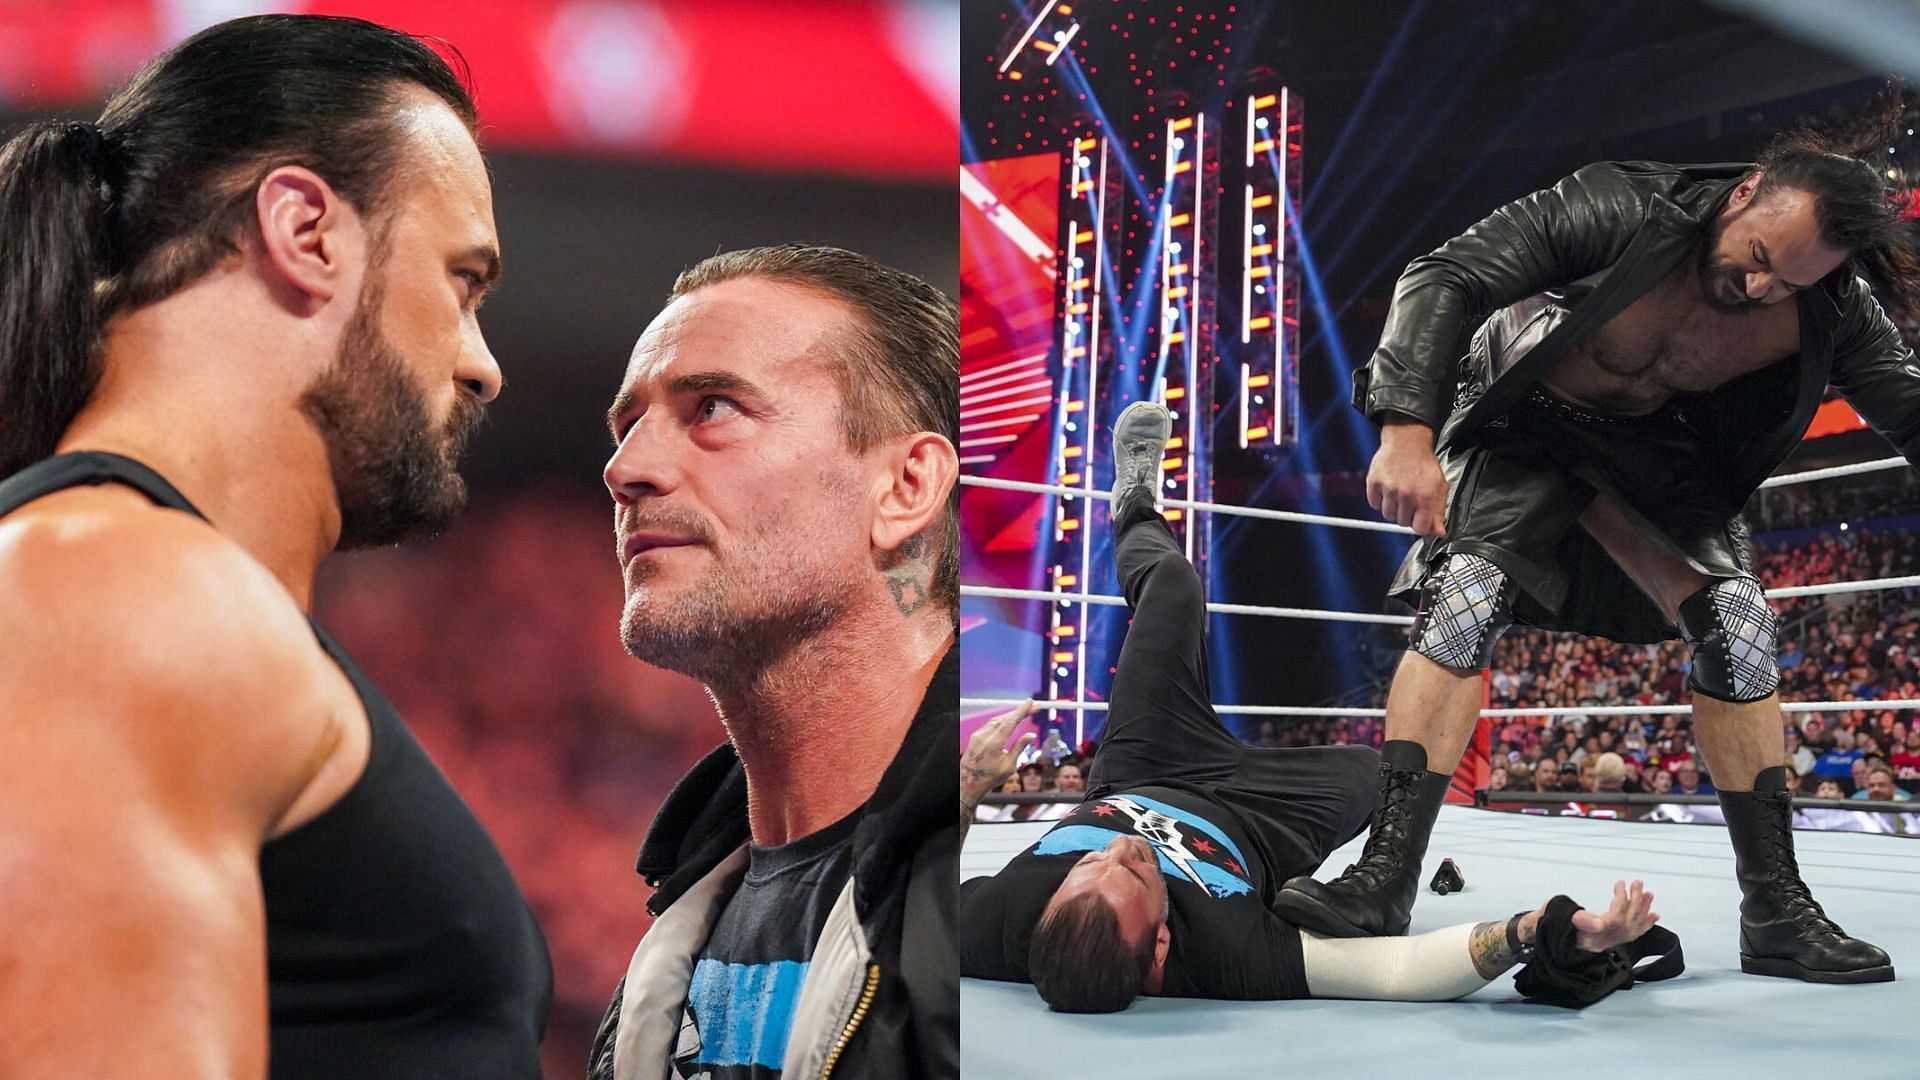 Drew McIntyre and CM Punk were feuding before Punk